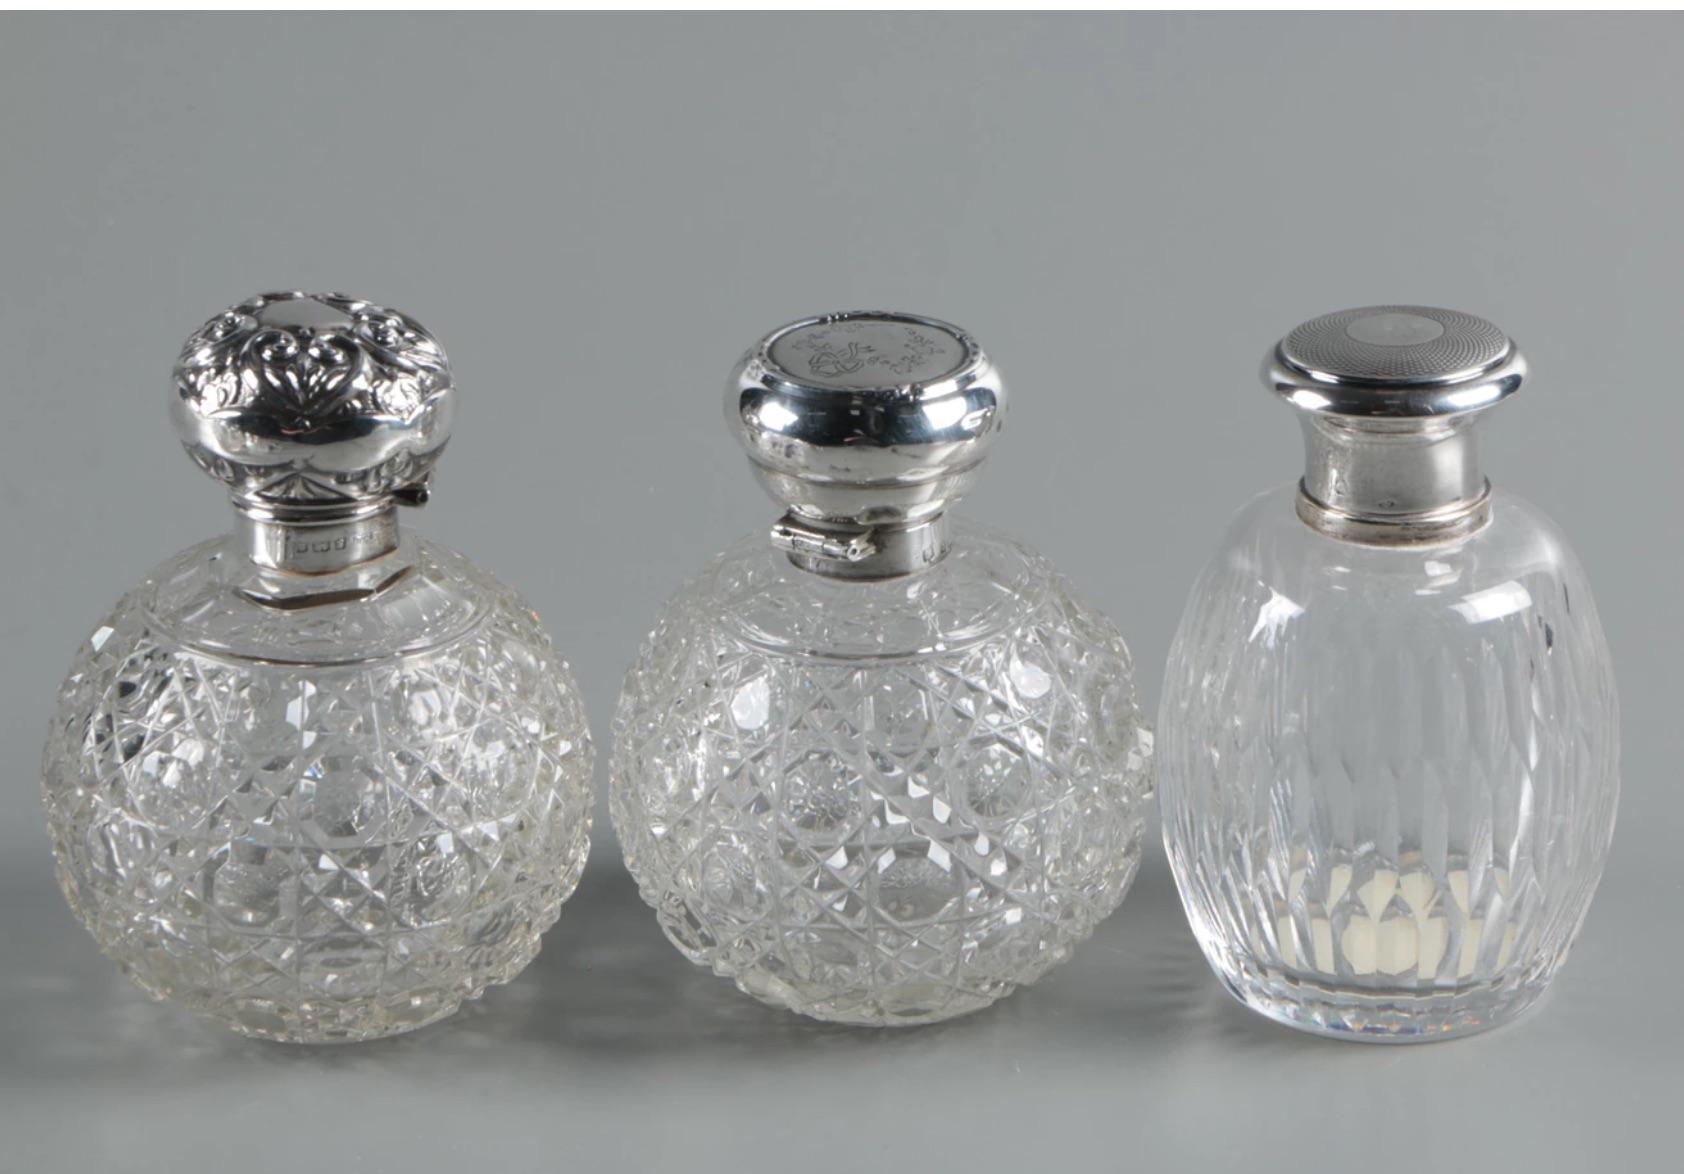 An very important collection of nine (9) antique circa 1839 to 1902 to vintage sterling silver and cut crystal perfume bottle and vanity jars. The collection features a perfume bottle by William Devenport of Birmingham, England, marked with a 1902